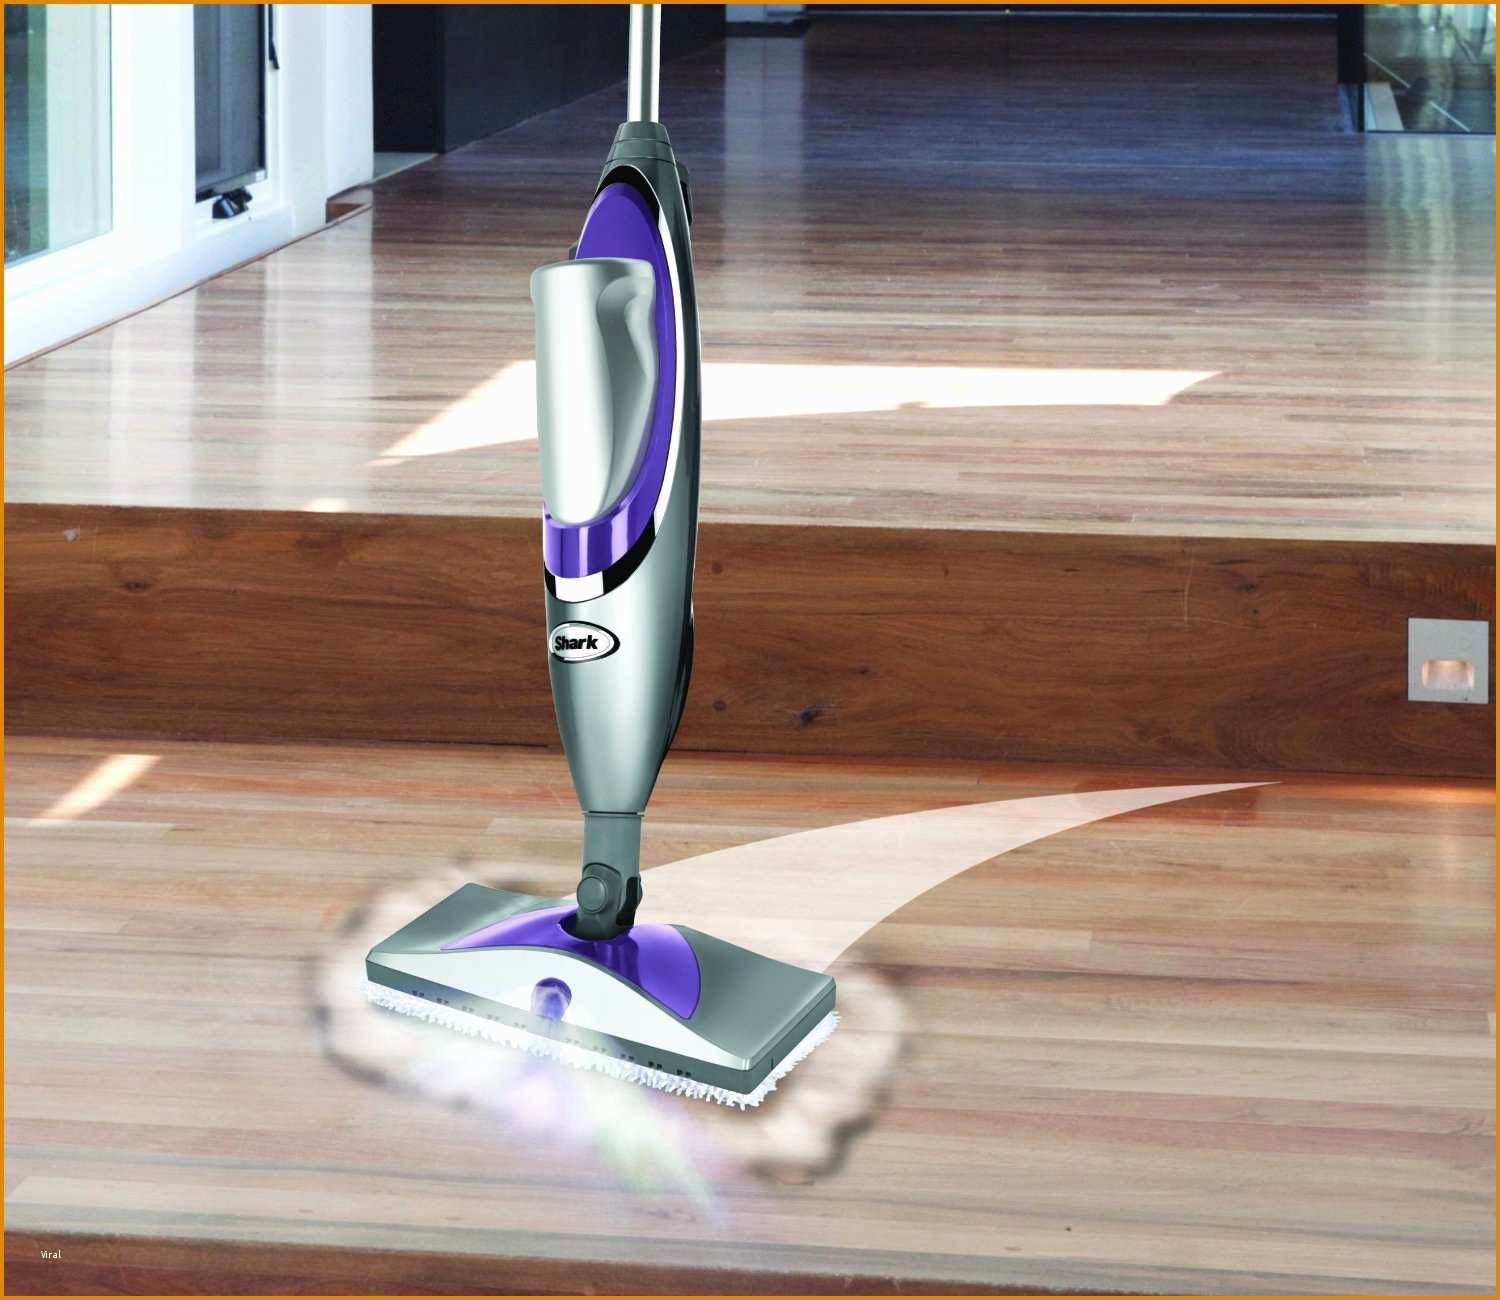 25 Popular Steam Mop and Hardwood Floors 2024 free download steam mop and hardwood floors of shark steam mop deluxe www topsimages com pertaining to shark steam mop wood floors amazing petite planet wood floor jpg 1500x1300 shark steam mop deluxe